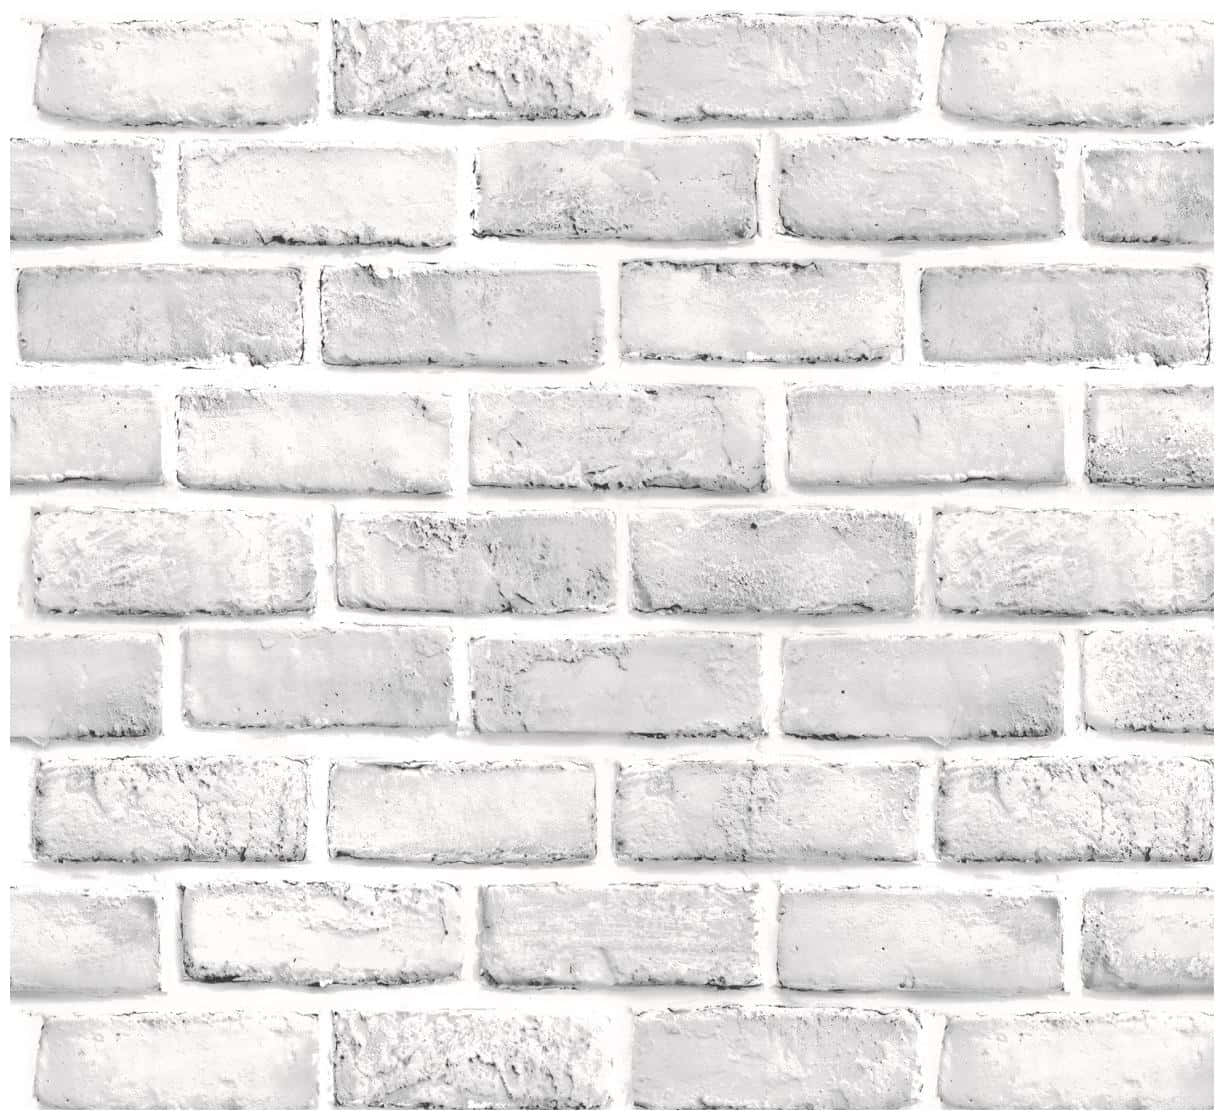 White Brick Pictures Kh25gfuopadcrwgm 